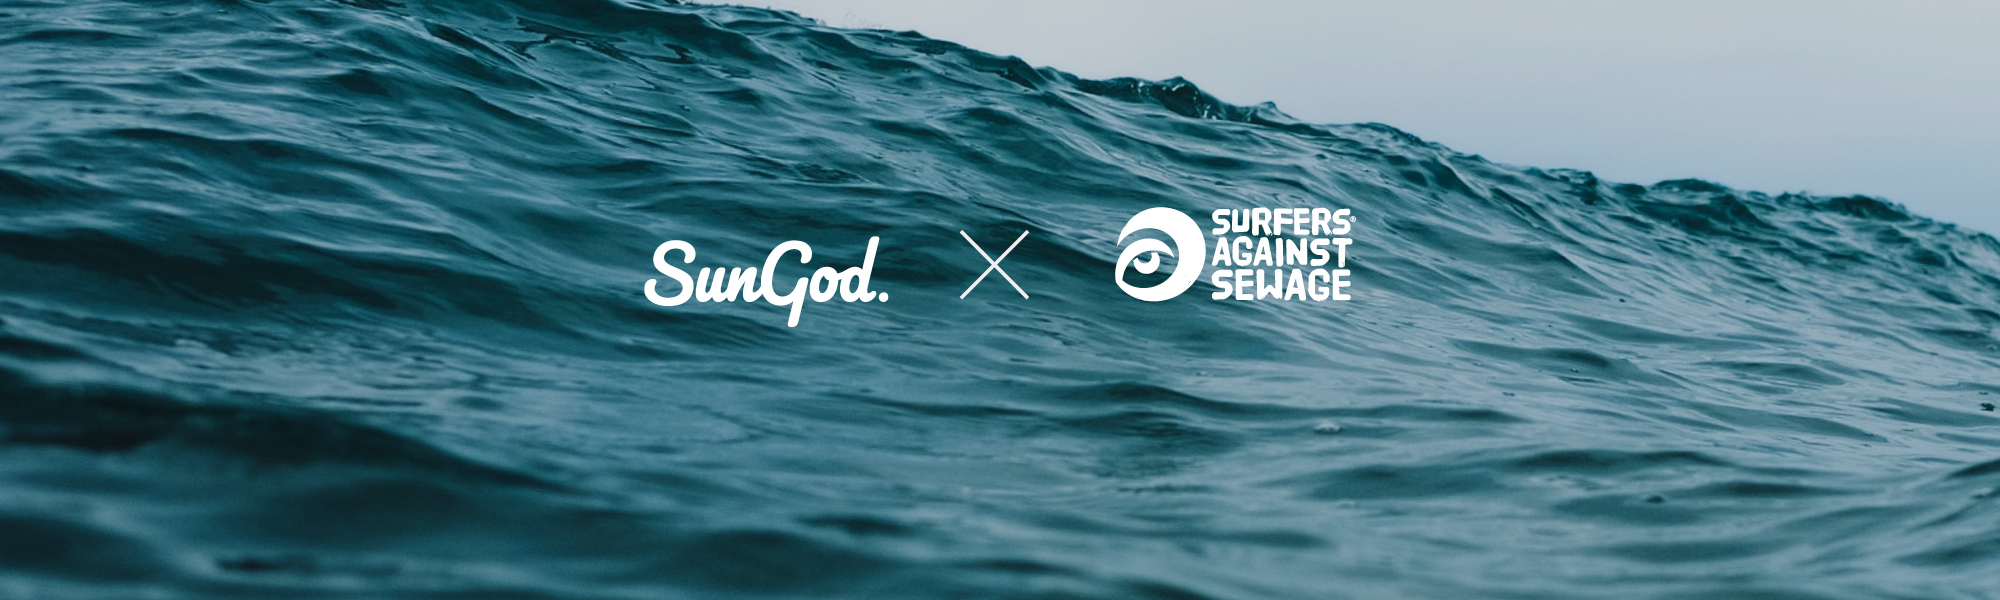 SunGod X Surfers Against Sewage: The Oceans Need Your Help